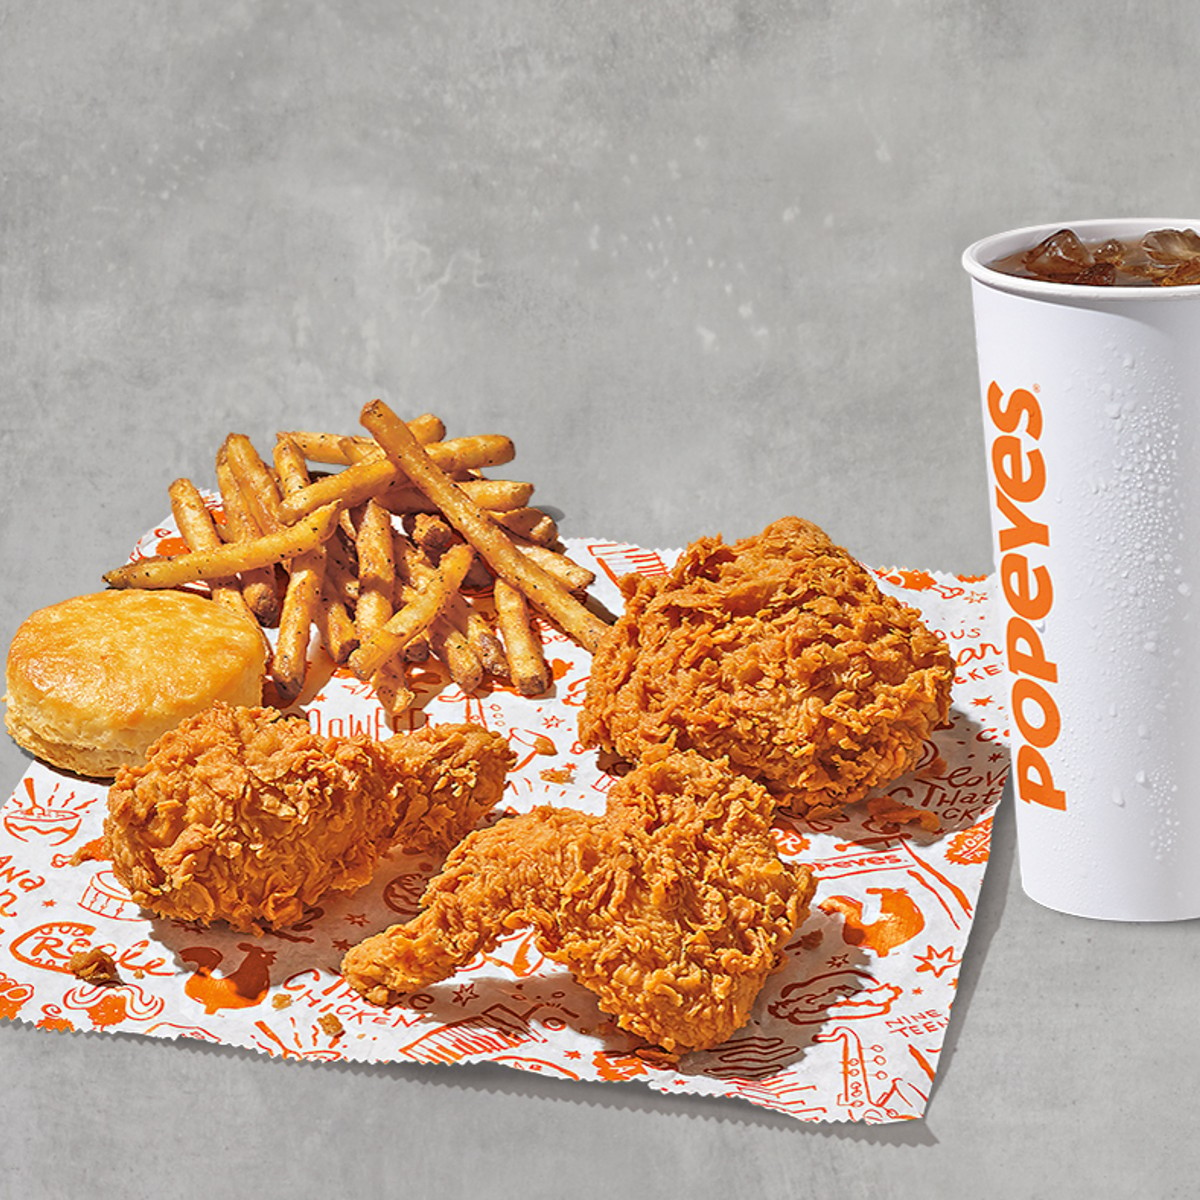 Popeyes Adds Mouthwatering New Chicken Wing Flavor to the Menu